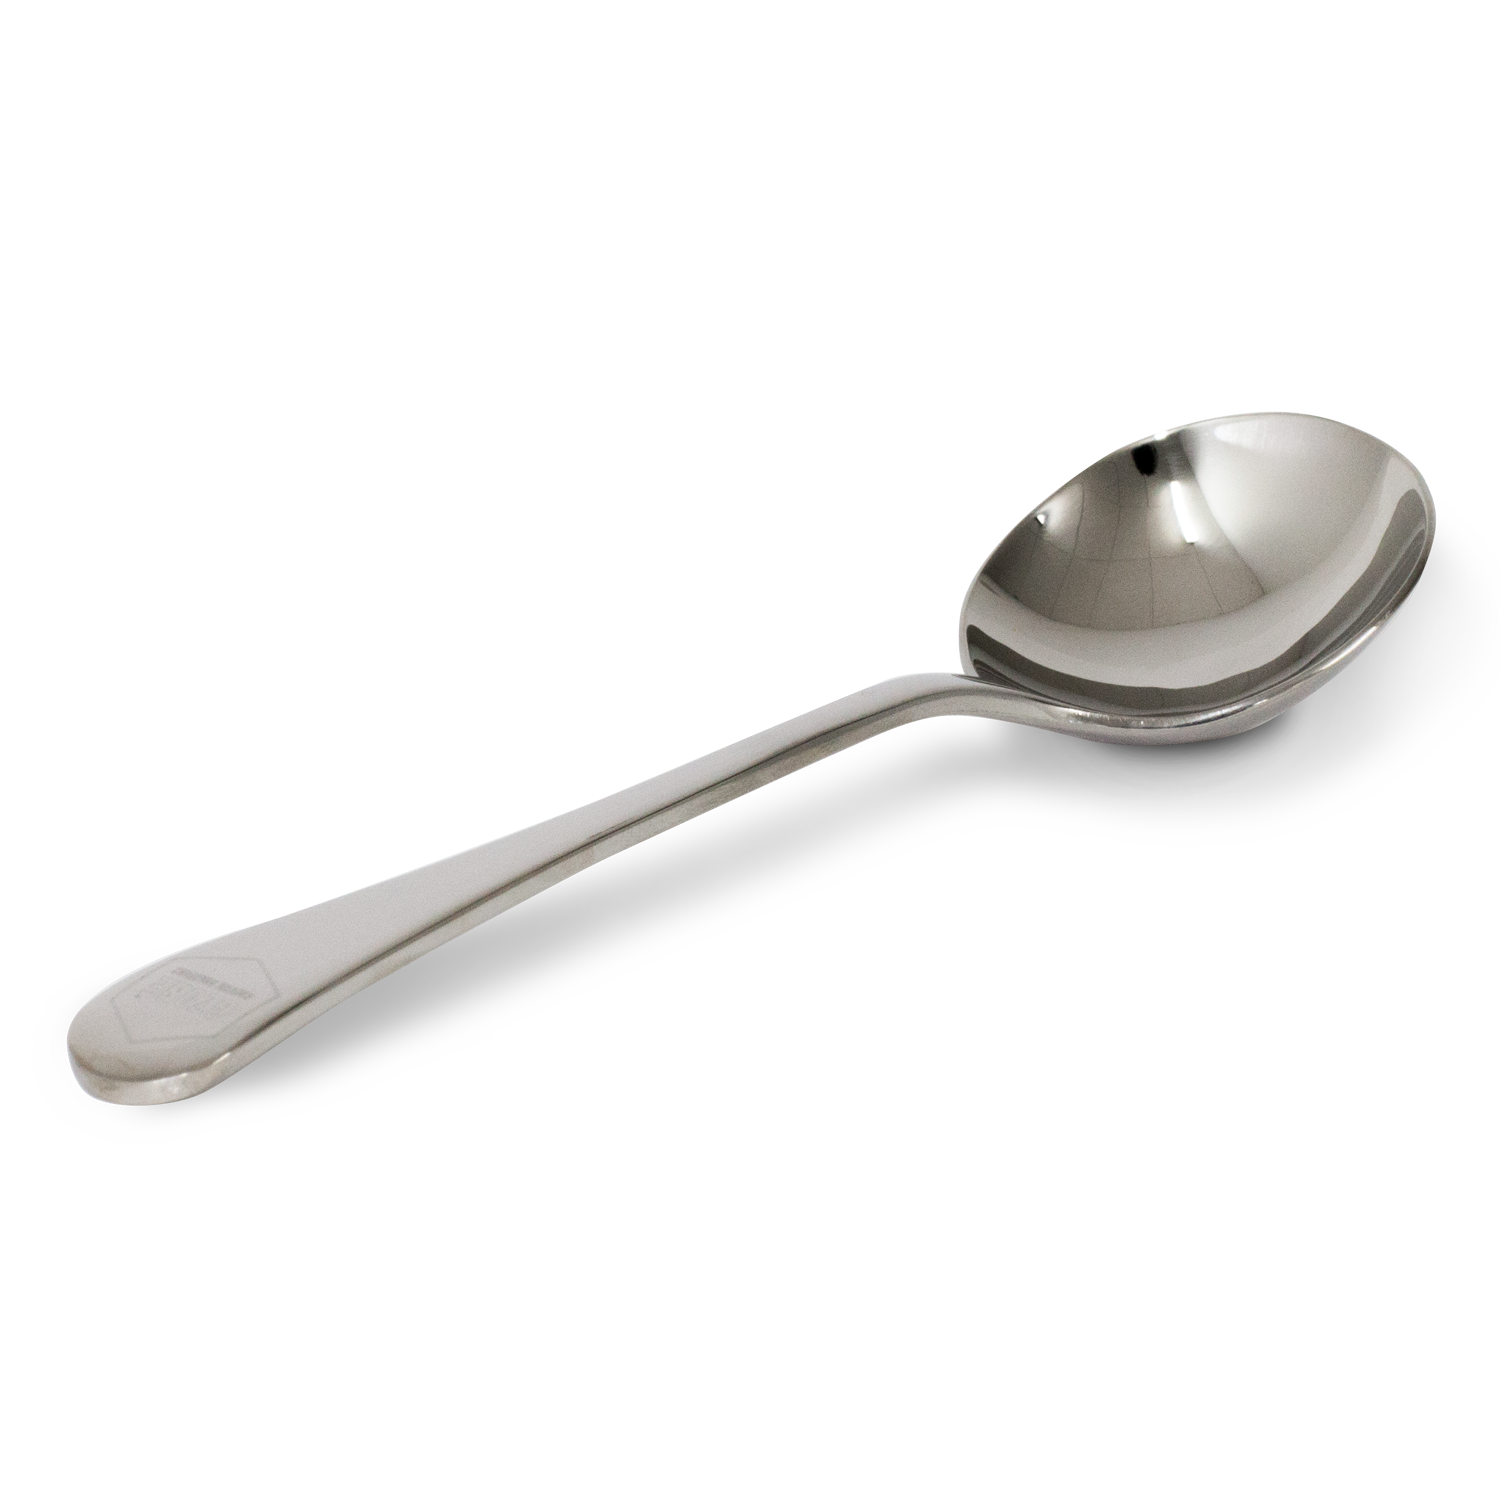 Steel Spoon Png Clipart - Spoon, Transparent background PNG HD thumbnail